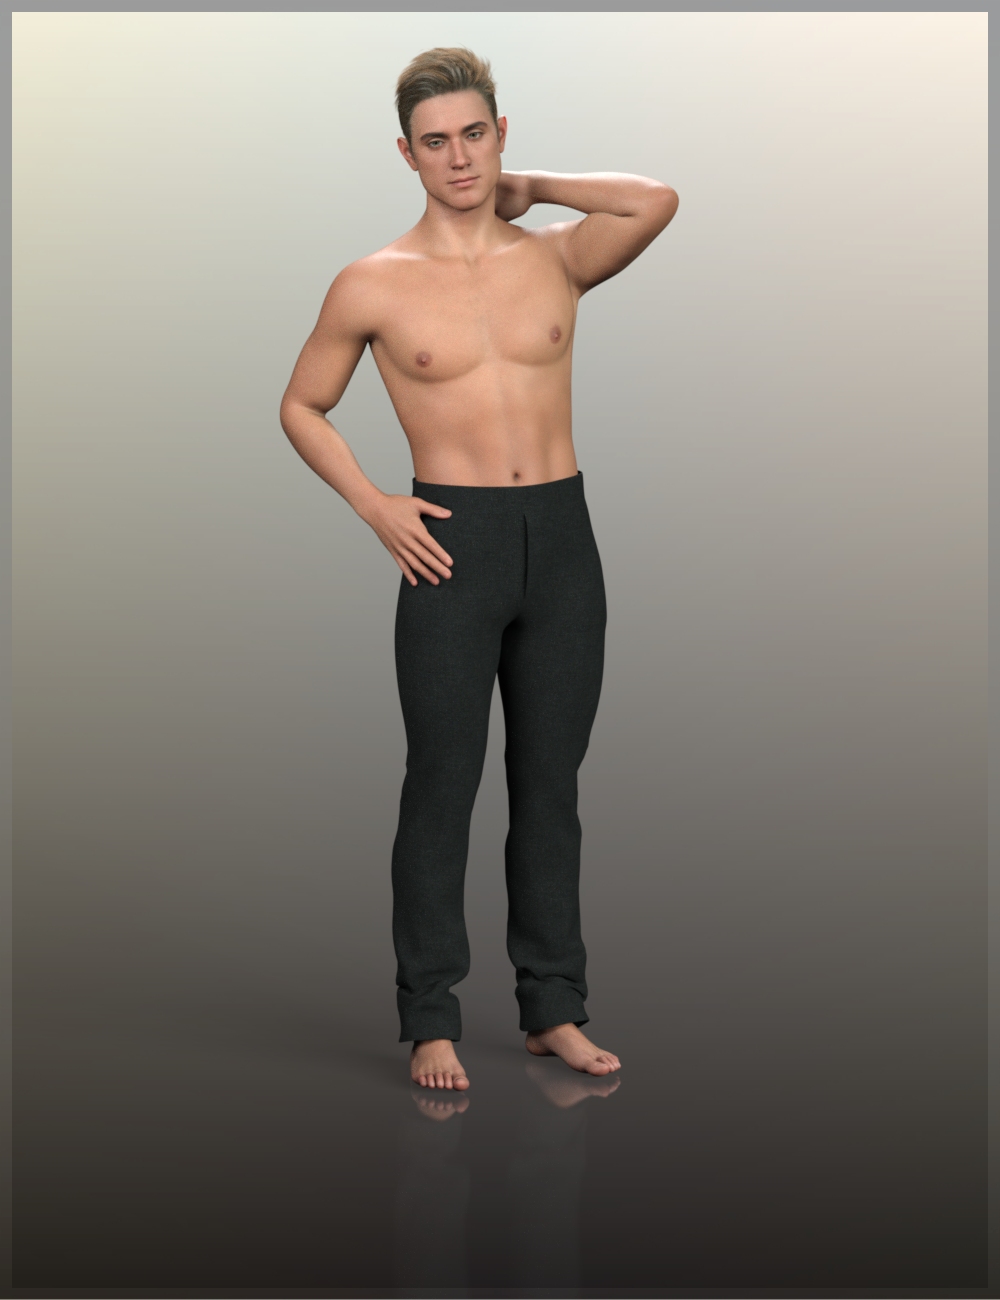 Masculine Classic Poses for Genesis 9 by: Handspan Studios, 3D Models by Daz 3D